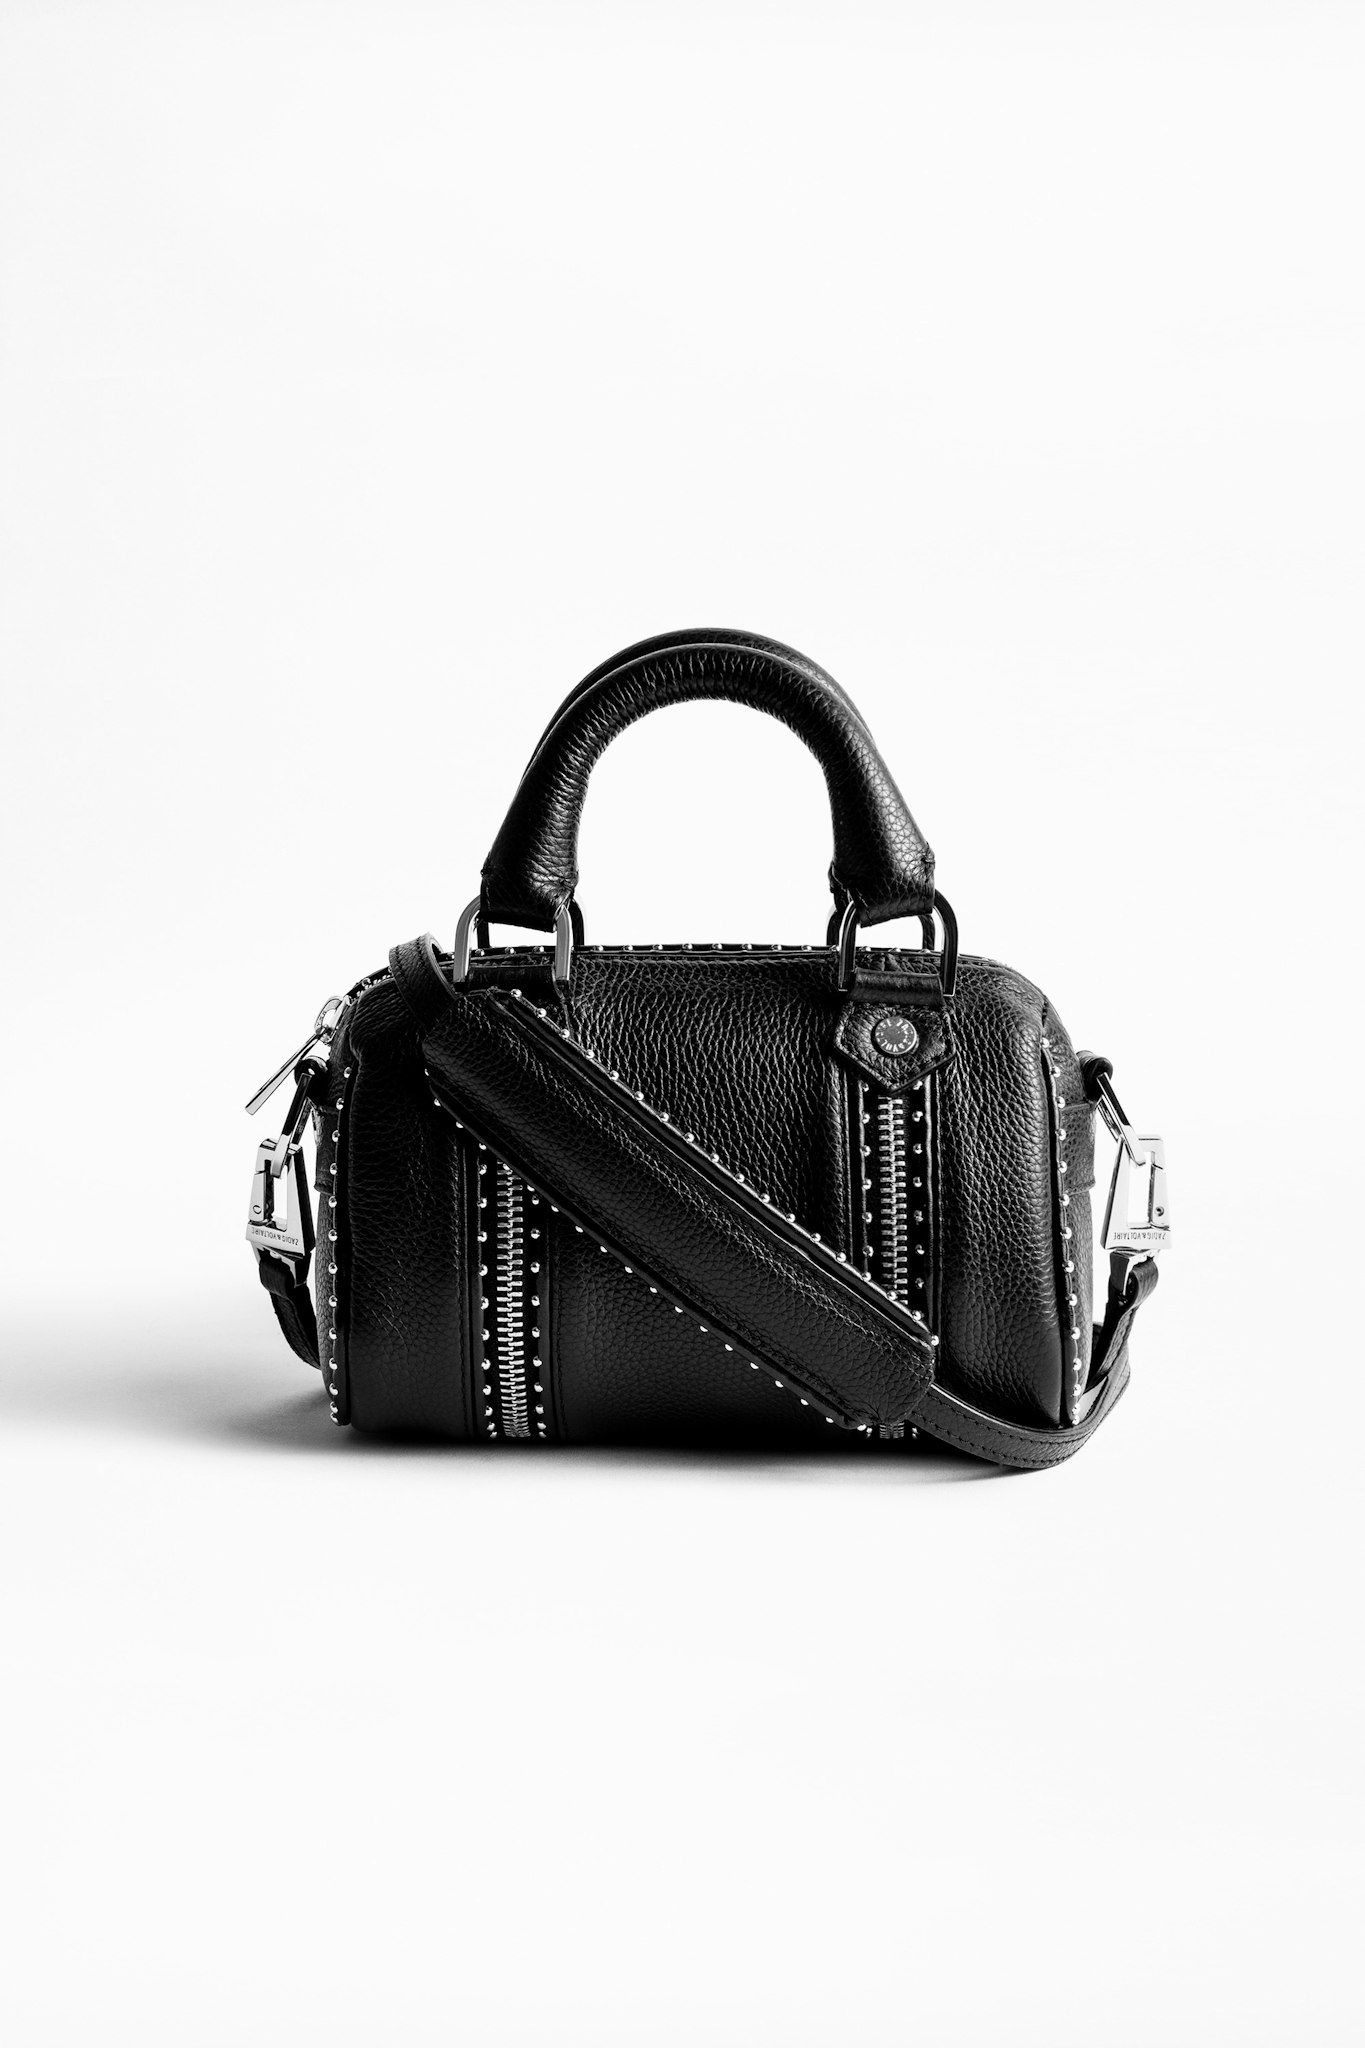 Zadig And Voltaire Bags :: Keweenaw Bay Indian Community